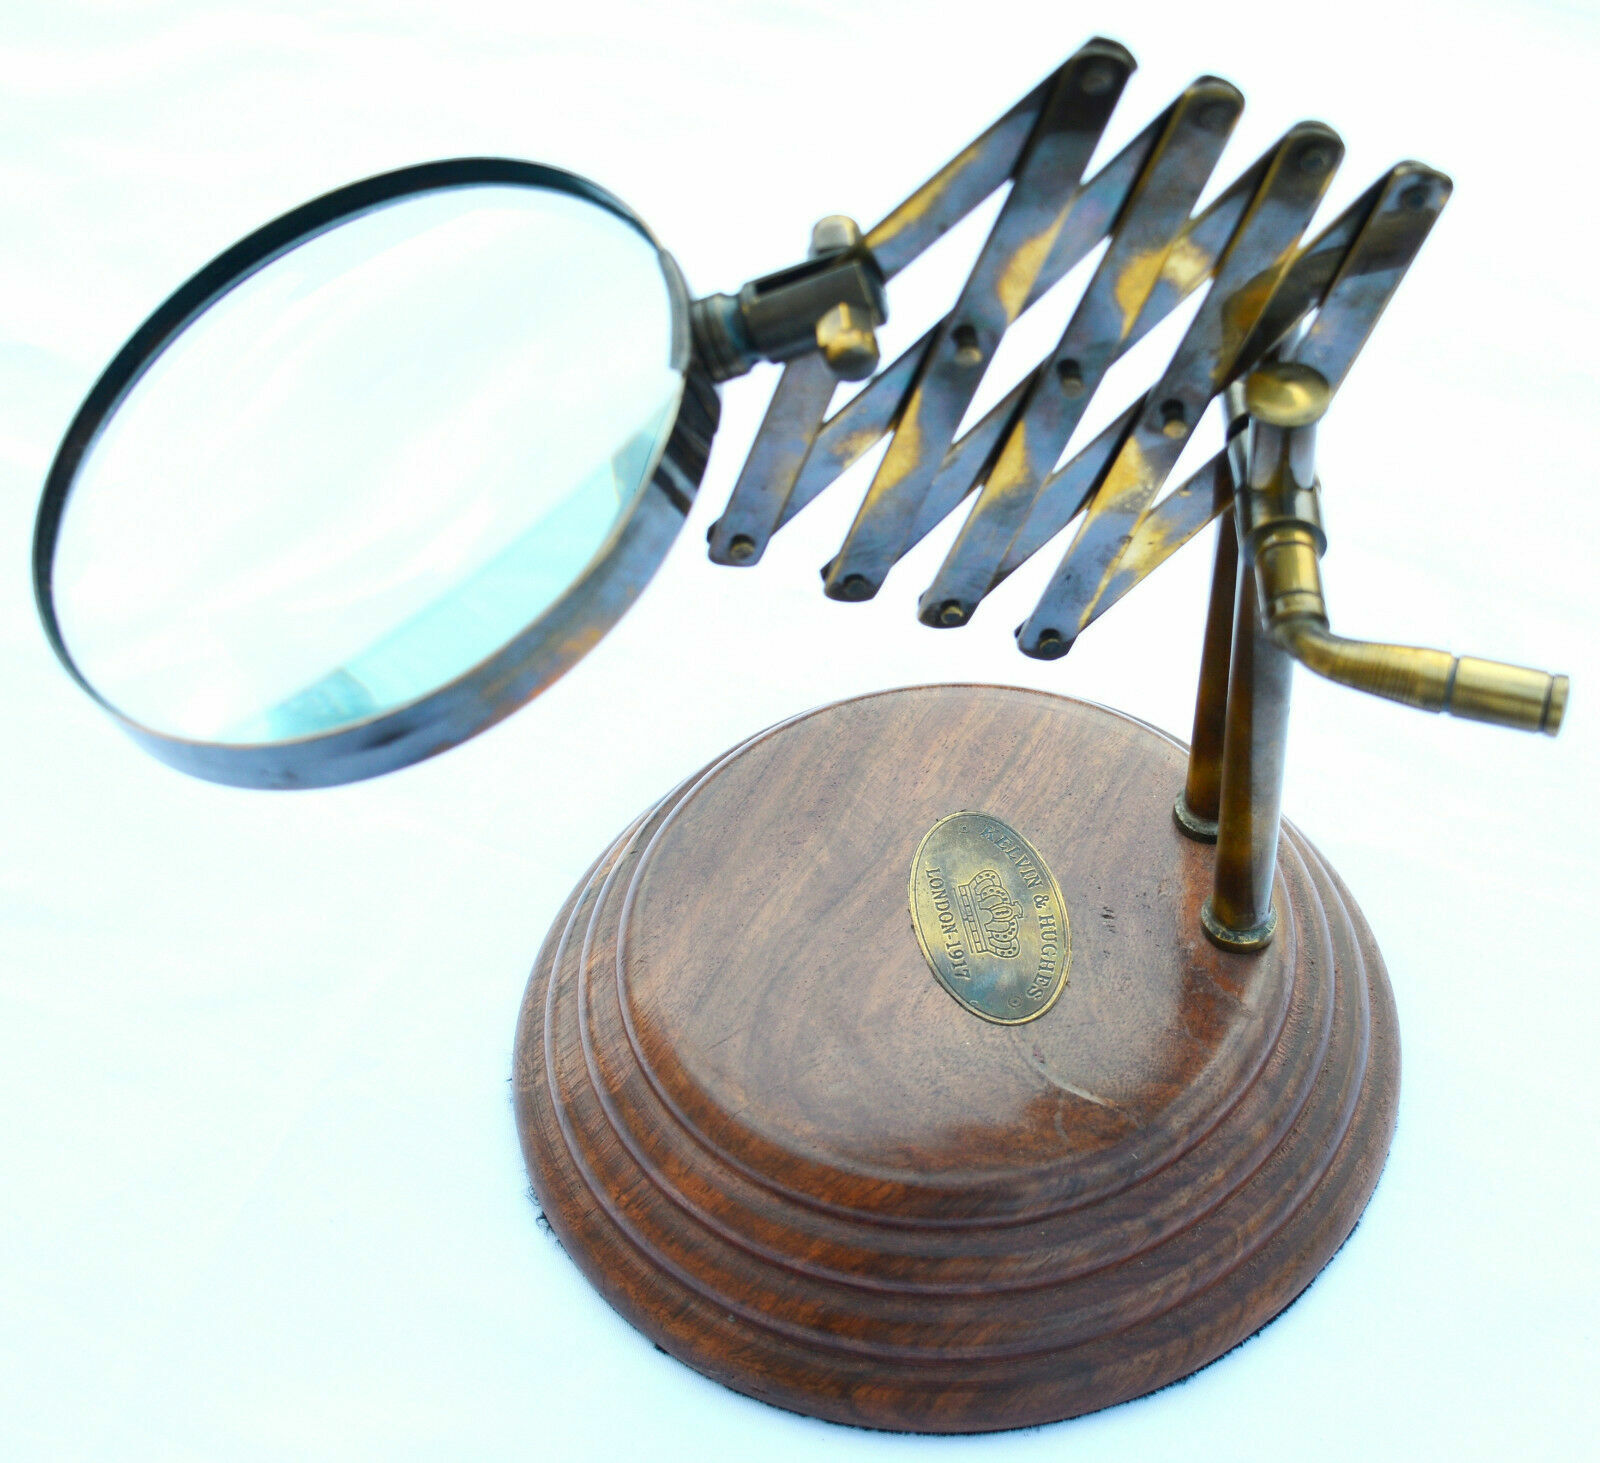 Old Desk Top Channel Magnifier Brass Vintage Magnifying Glass on Wooden Stand